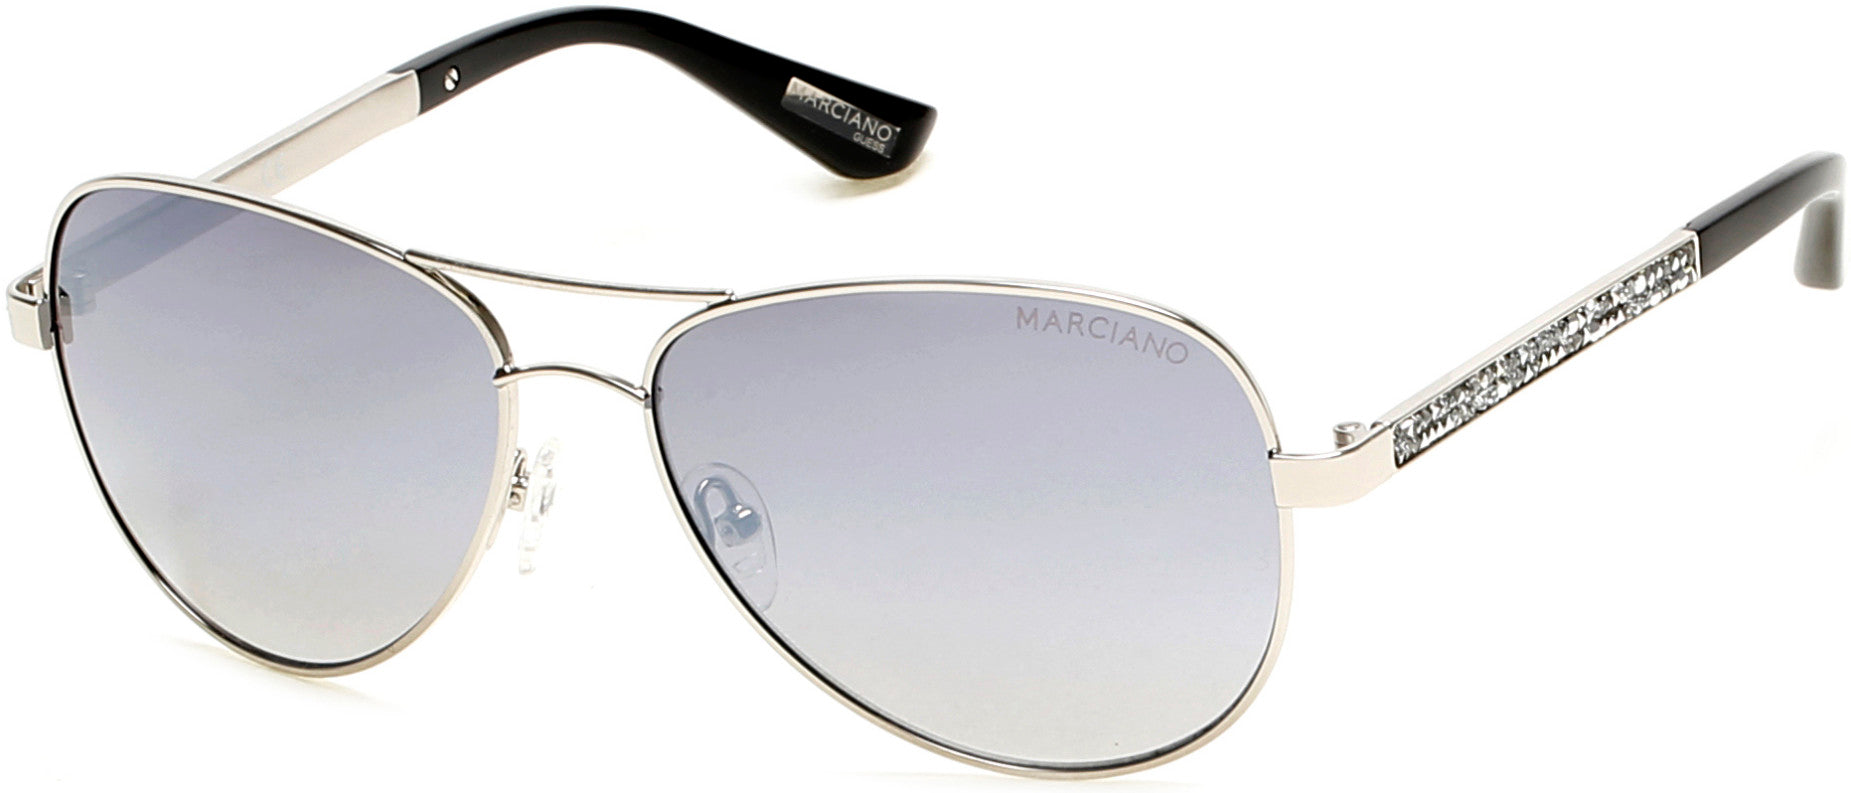 Guess By Marciano GM0754 Pilot Sunglasses 06C-06C - Shiny Silver/smoke Gradient With Light Flash Lens